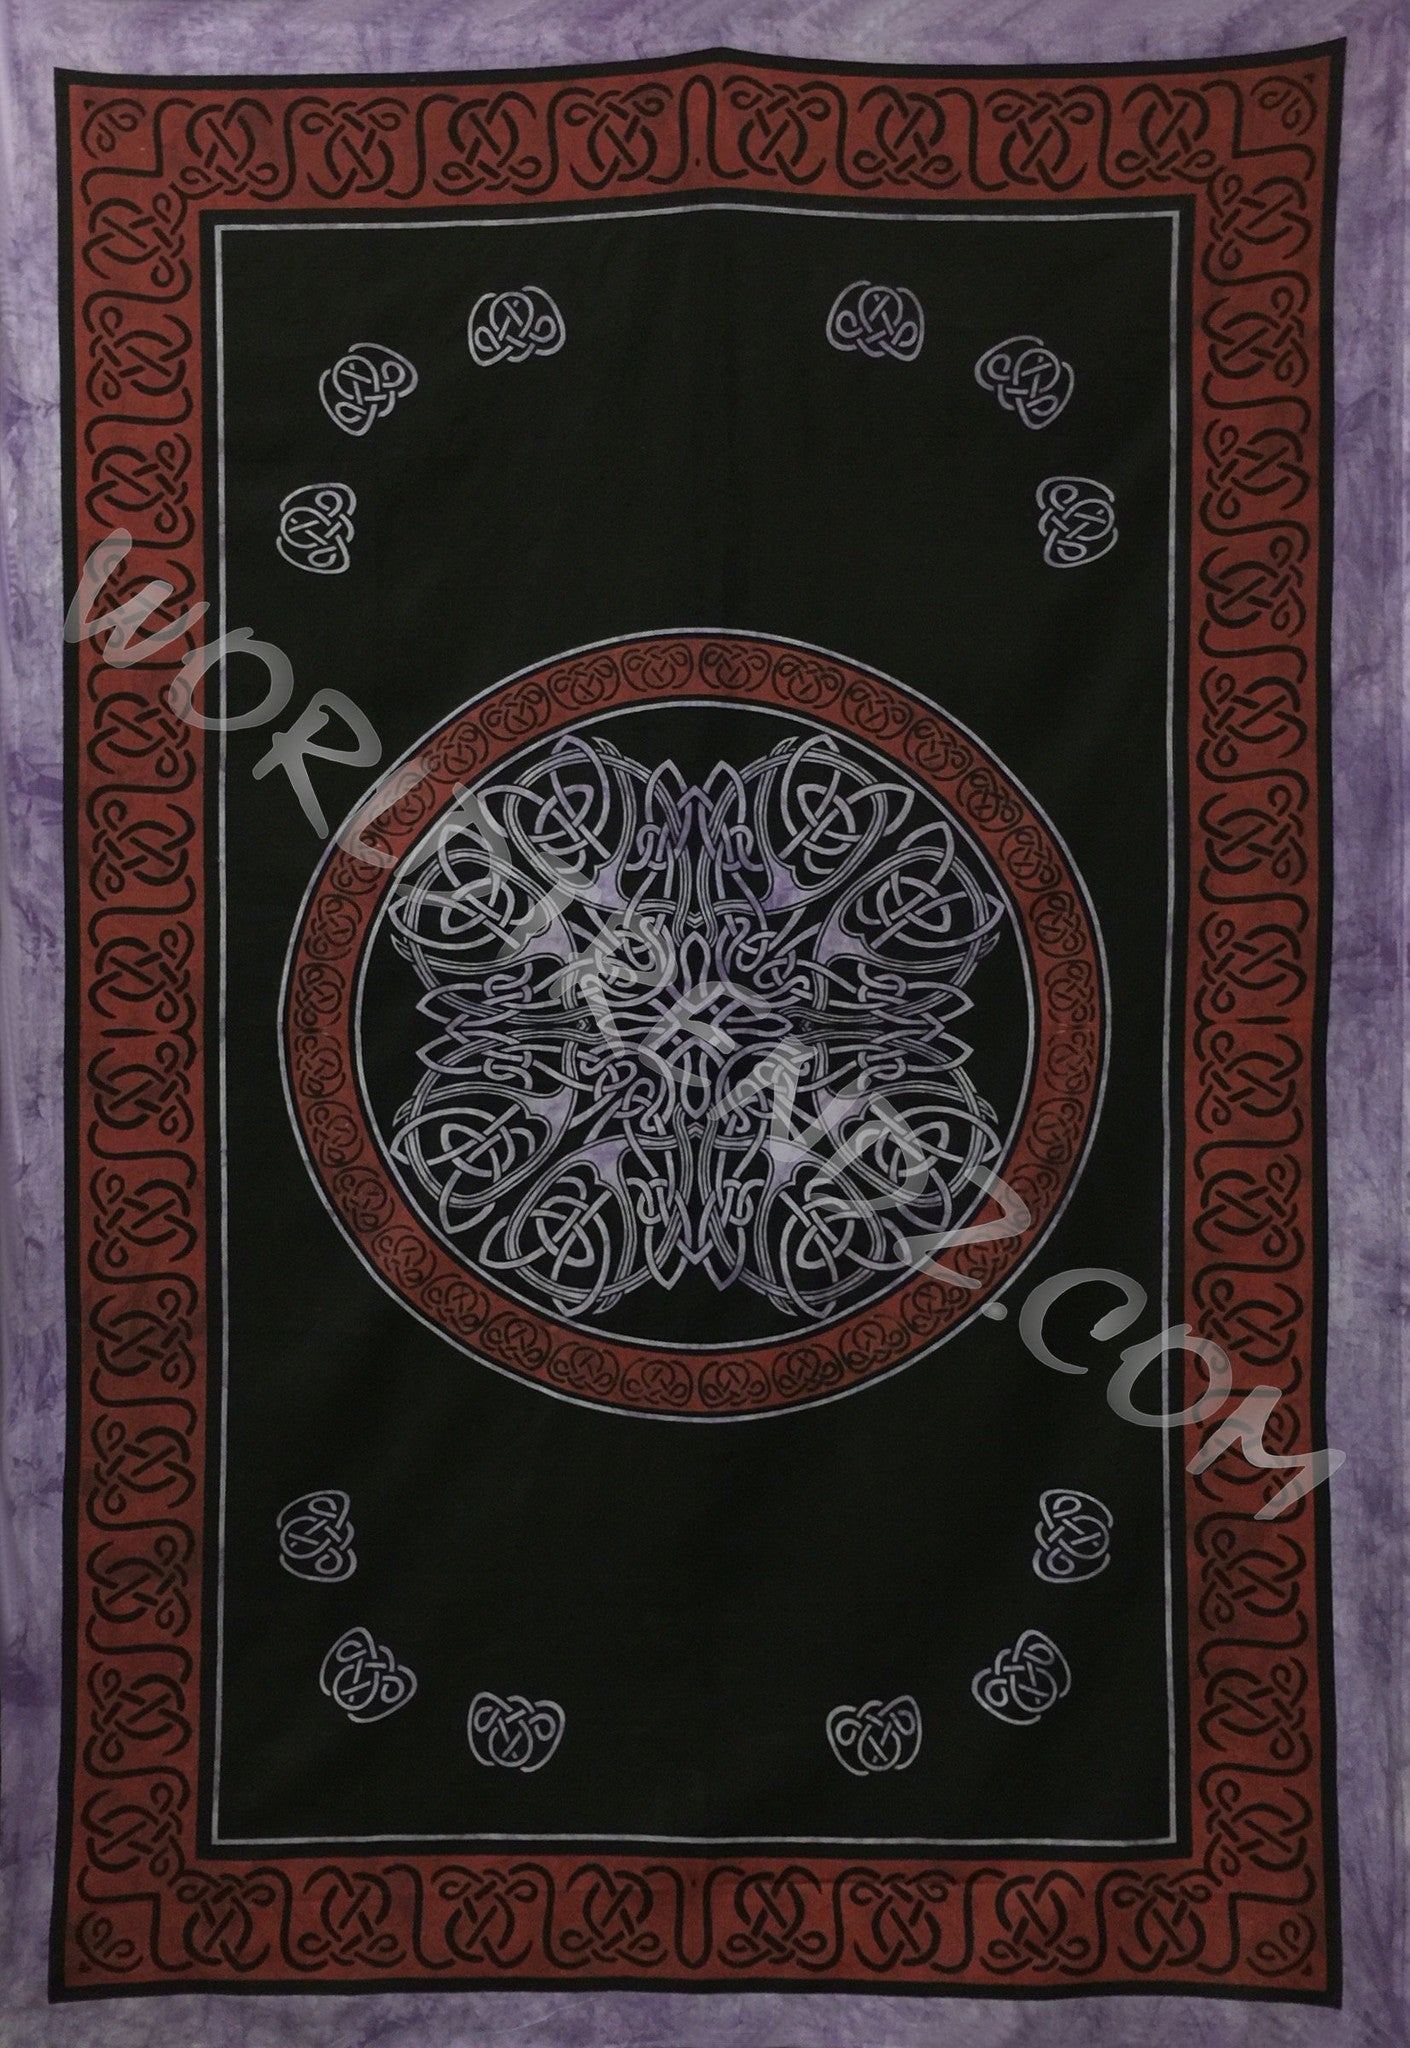 CELTIC KNOT MANDALA TAPESTRY PUPRLE WITH RED BORDERS